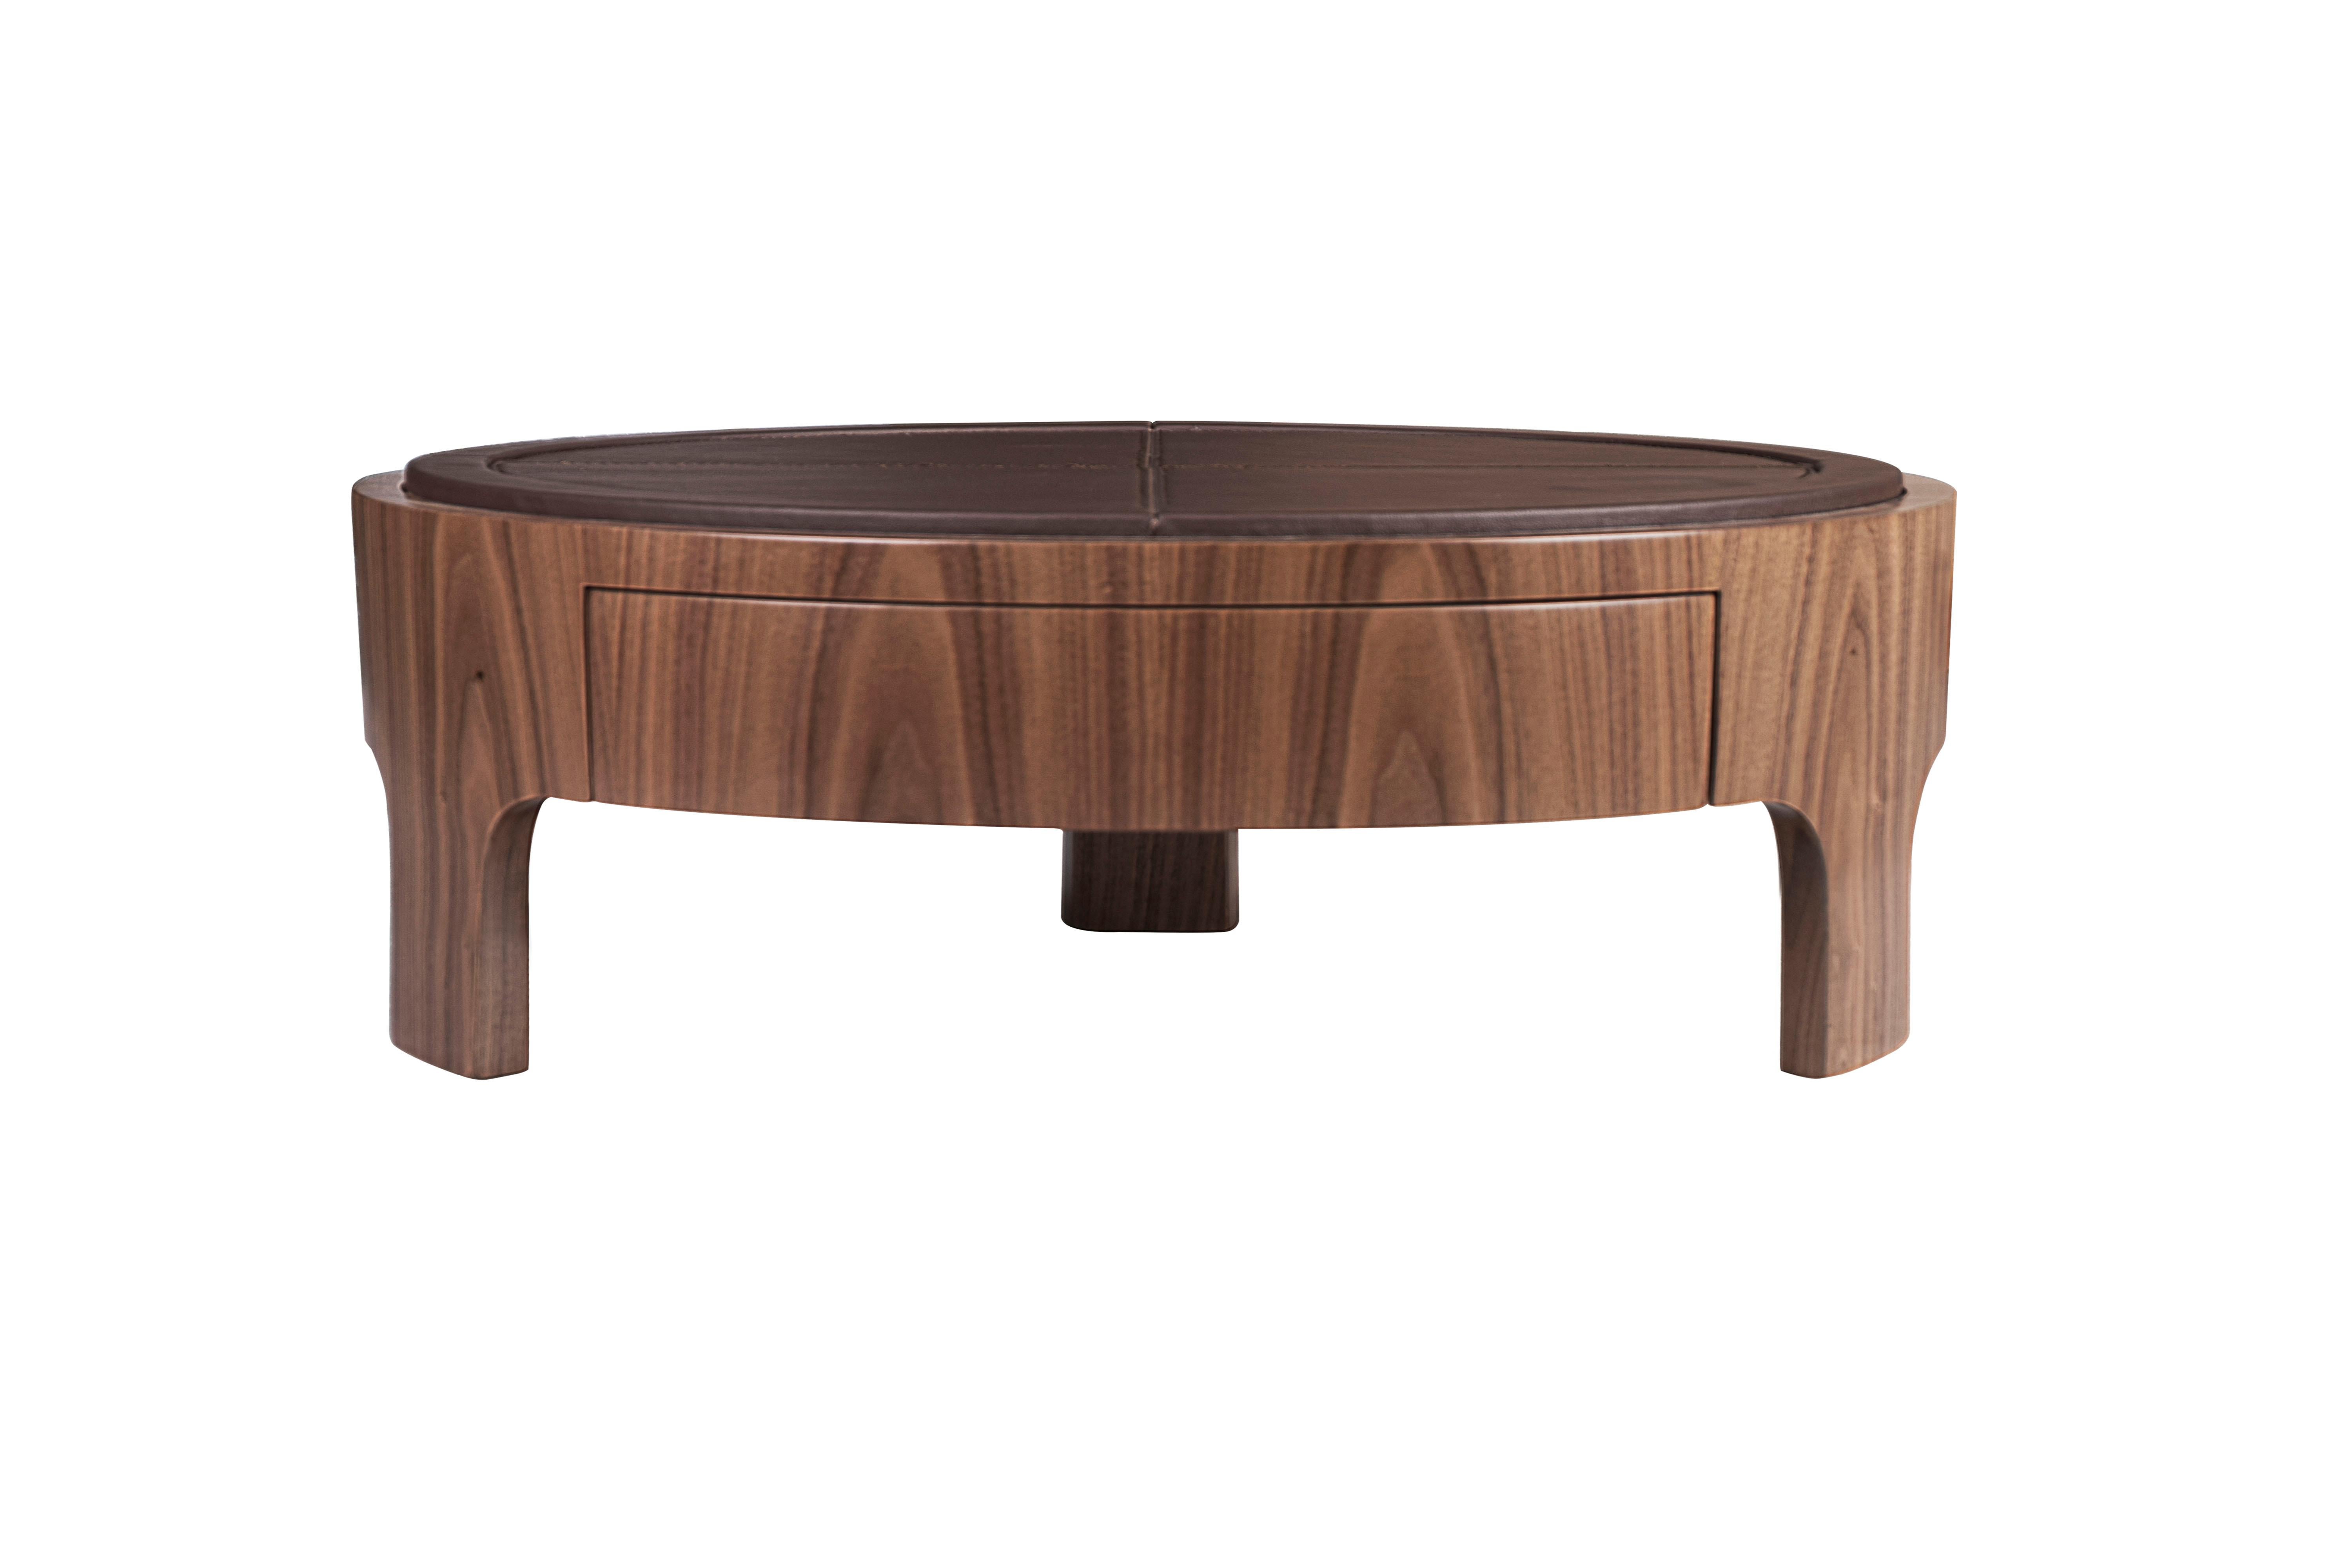 Portuguese 21st Century Churchill Center Table Walnut Wood by Wood Tailors Club For Sale